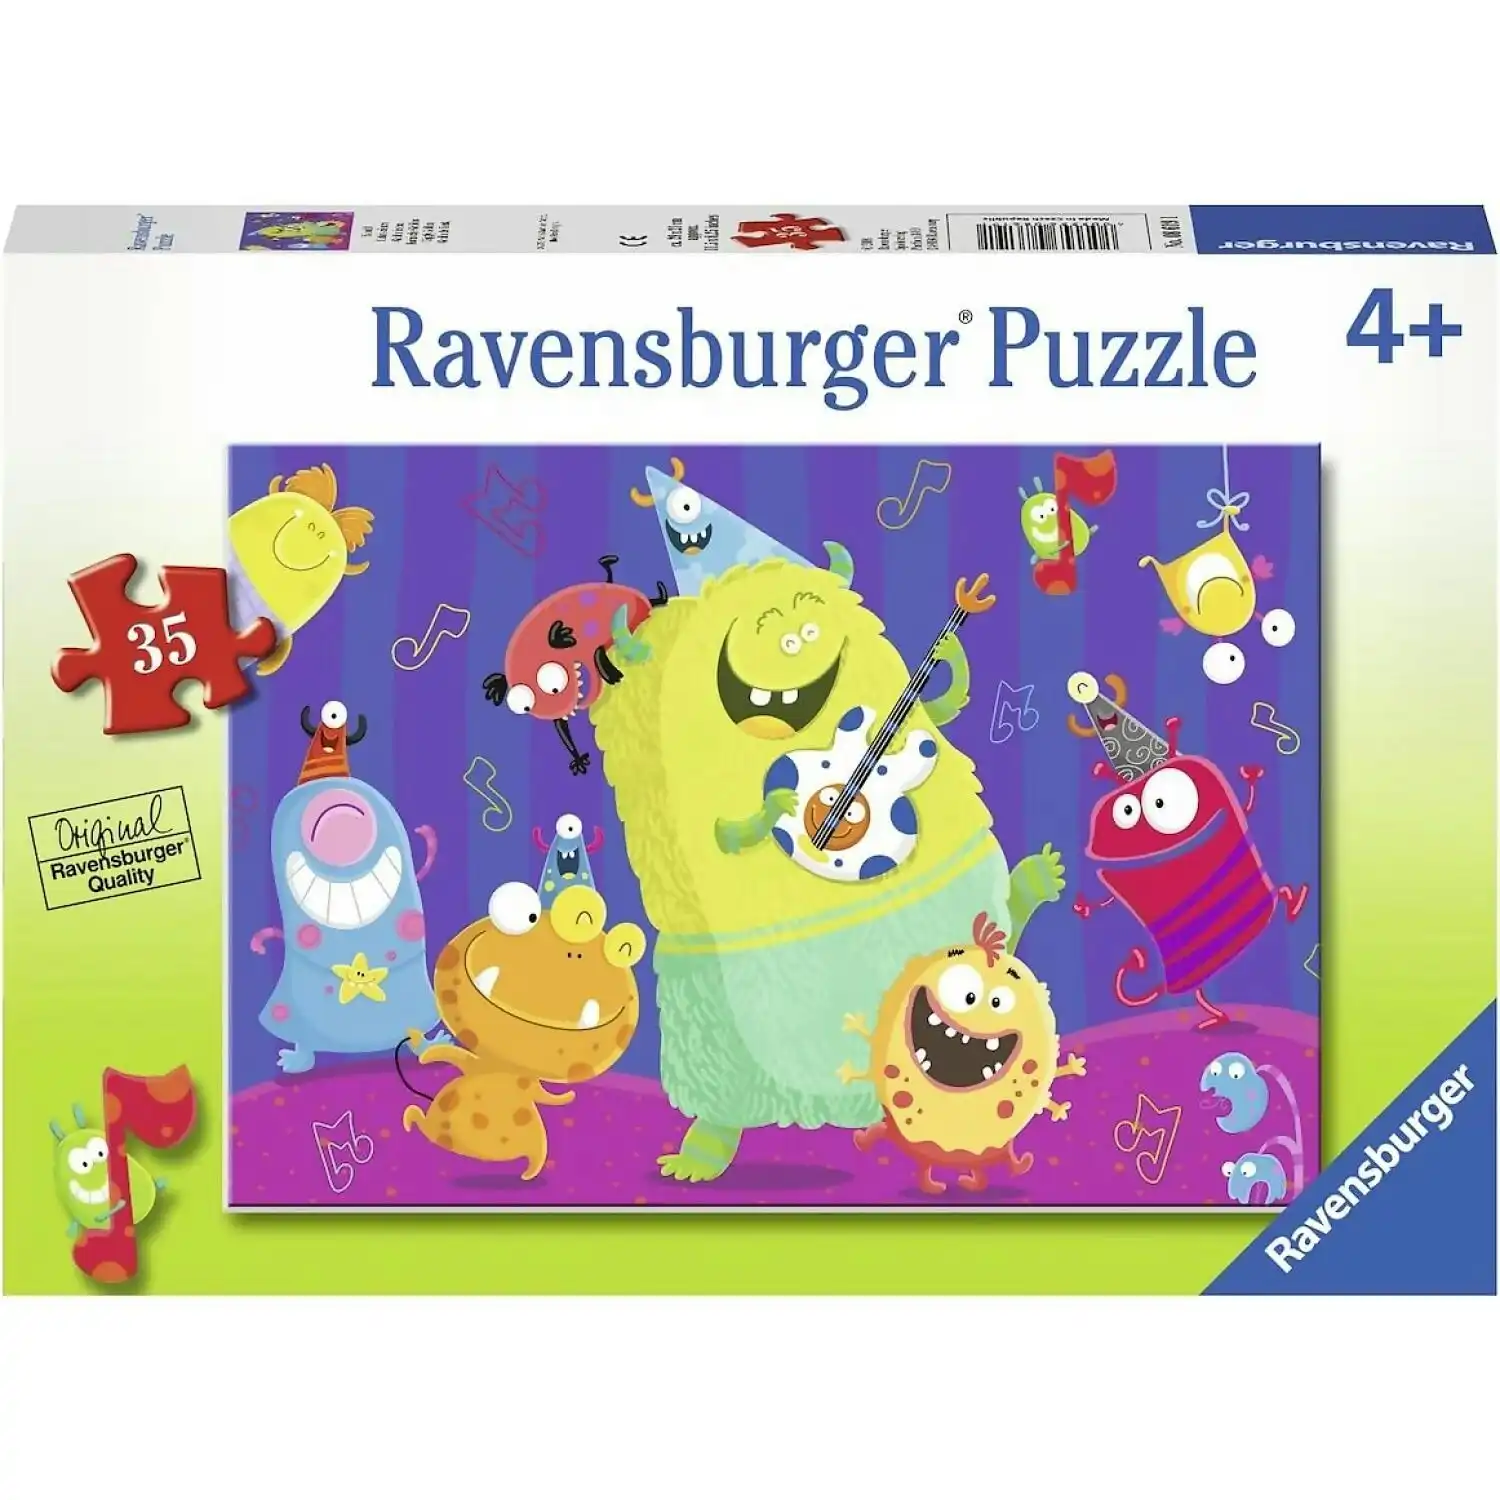 Ravensburger - Giggly Goblins Jigsaw Puzzle 35pc